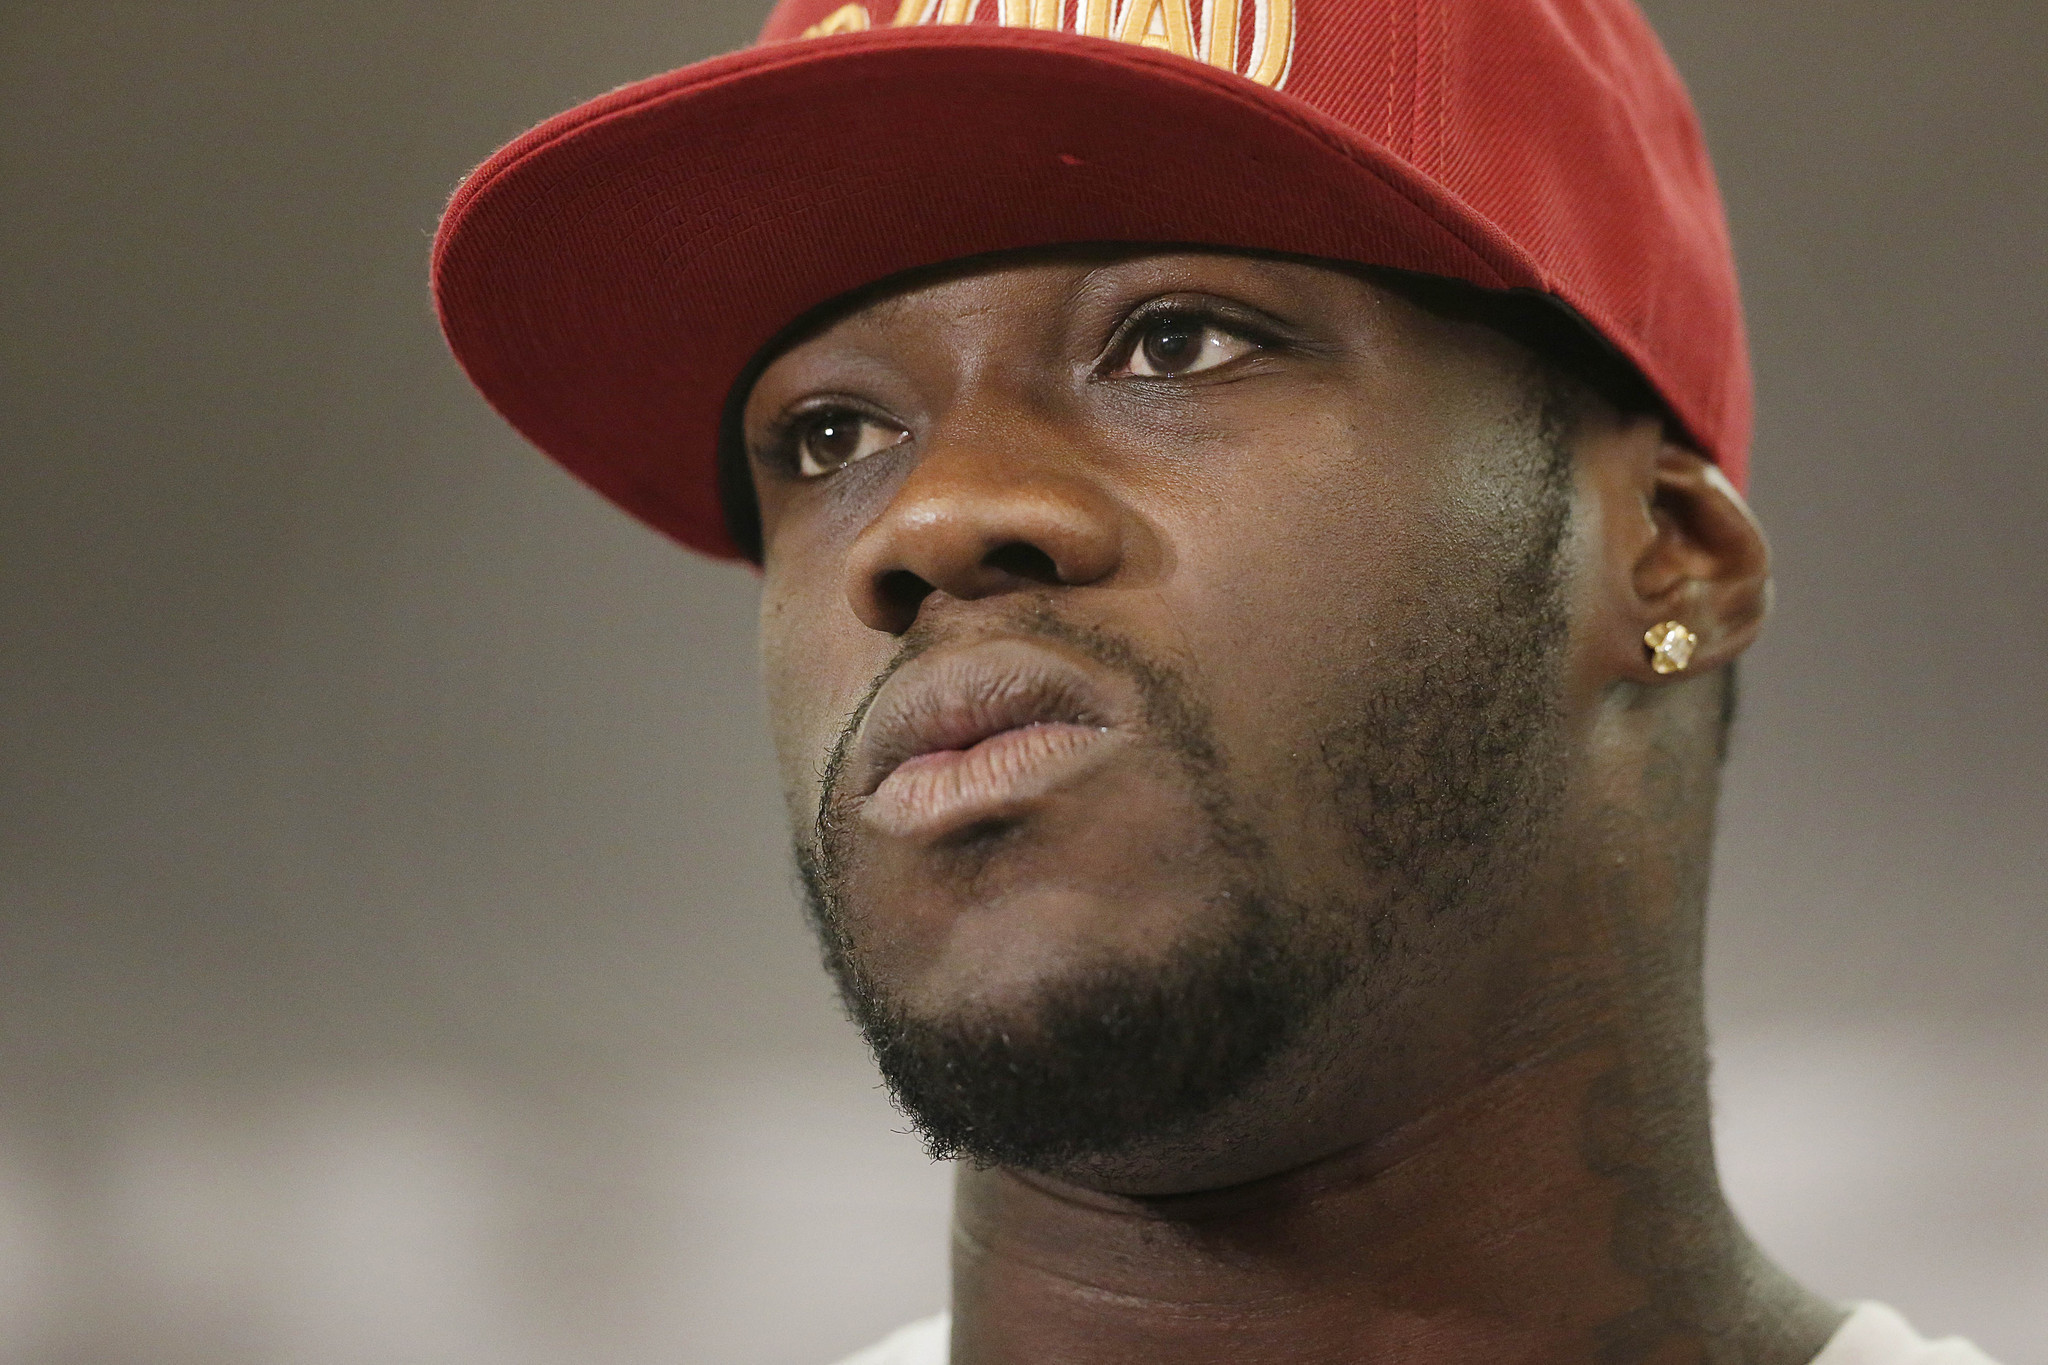 Deontay Wilder faces first heavyweight title defense against Eric Molina - LA Times - la-sp-sn-boxing-deontay-wilder-title-defense-eric-molina-20150612